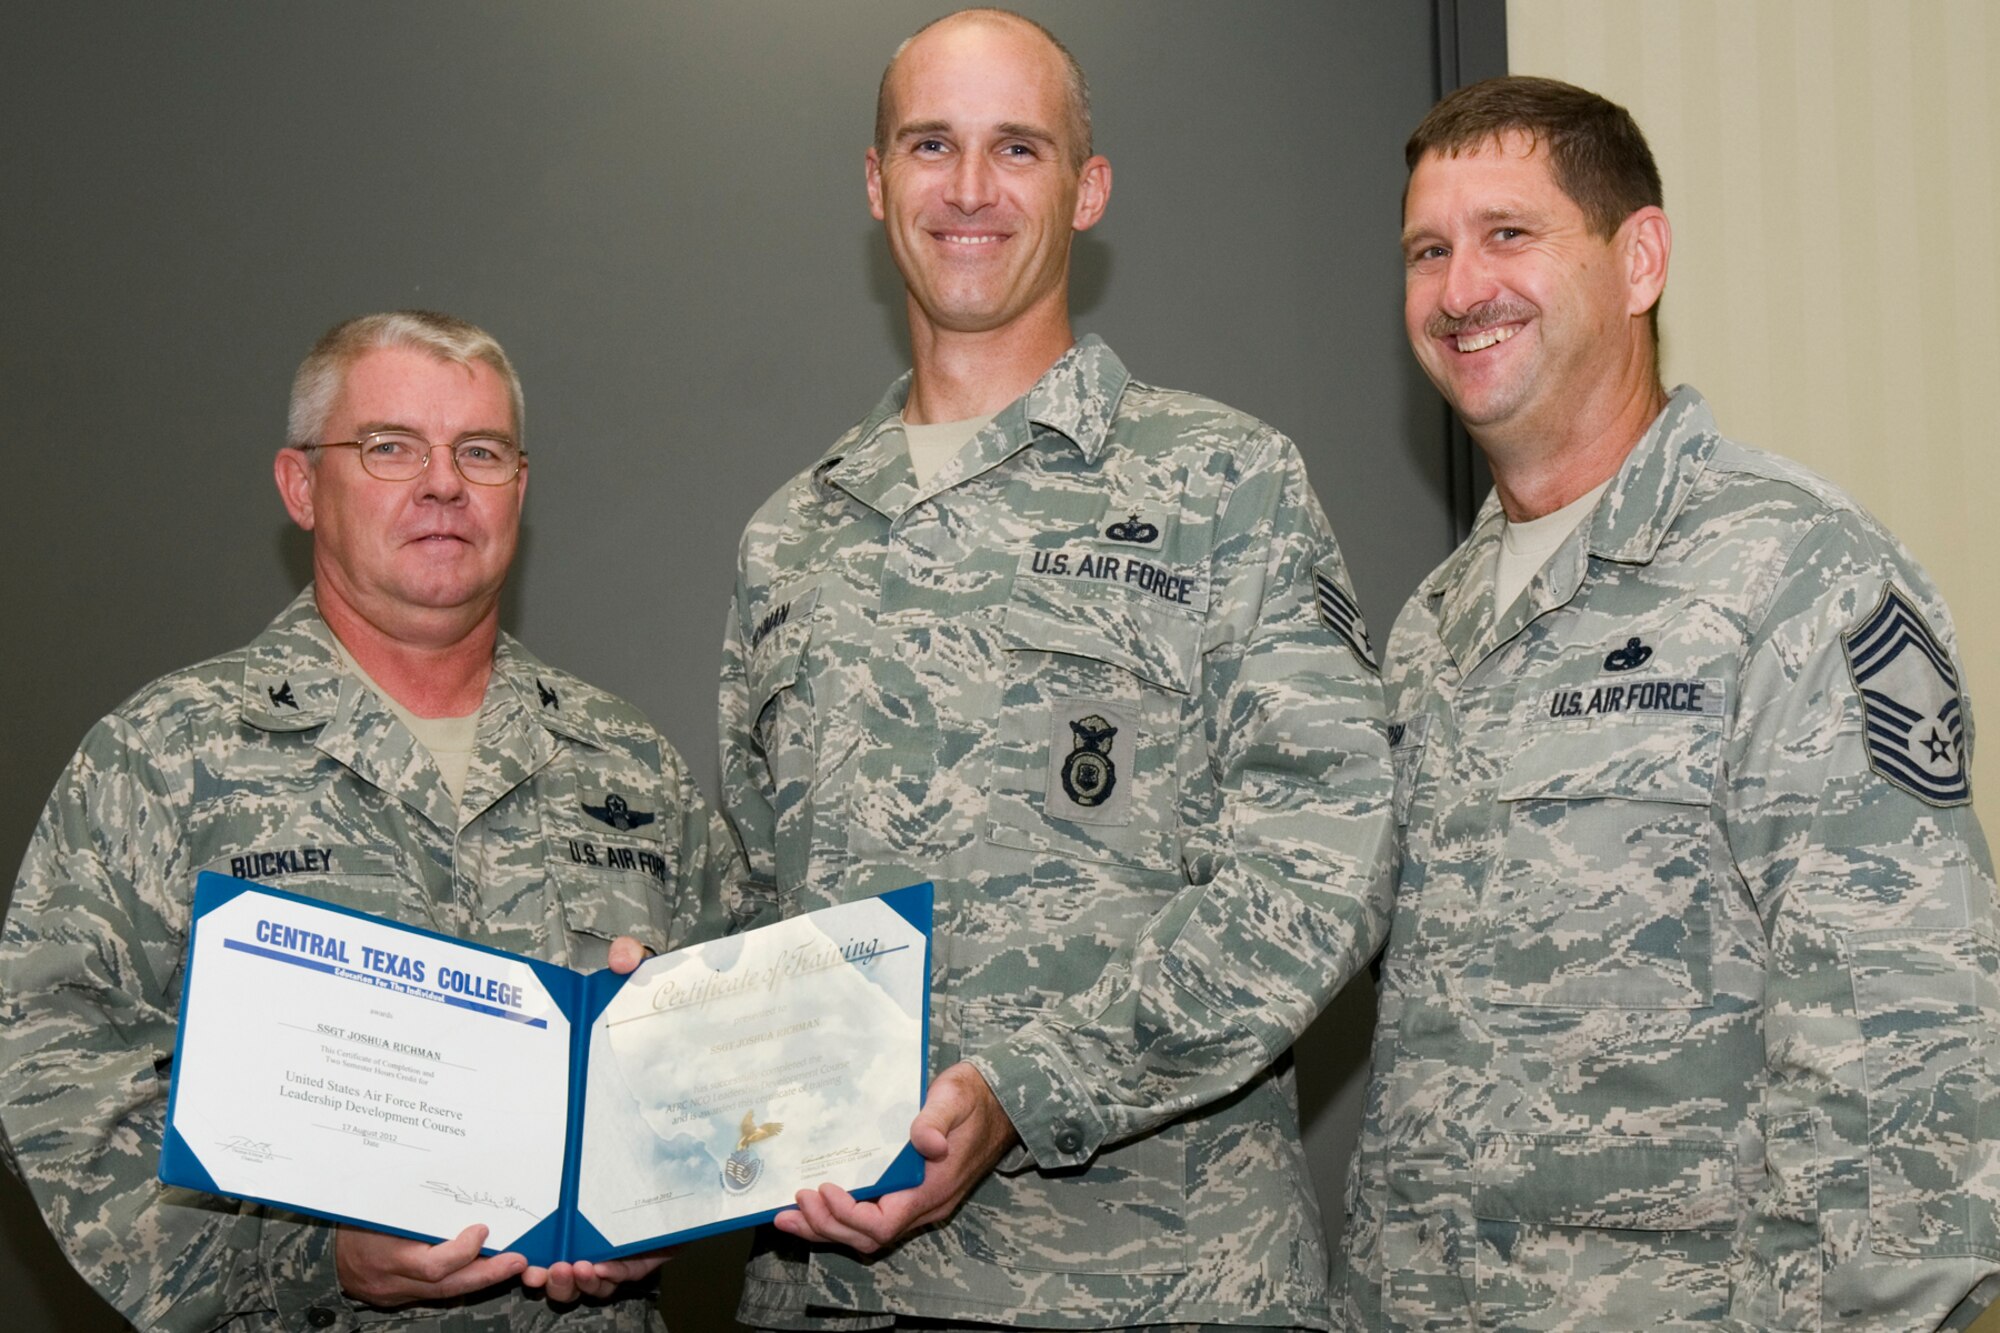 GRISSOM AIR RESERVE BASE, Ind. -- Staff Sgt. Joshua Richman, 434th Security Forces Squadron security response team member, receives a certificate of training from Col. Don Buckley, 434th Air Refueling Wing commander, and Chief Master Sergeant James Burba, 434th Maintenance Operations Flight maintenance superintendent, at a graduation ceremony for a Non-Commissioned Officer Leadership Development Course here Aug. 17. Richman graduated the course with 20 other NCOs. (U.S. Air Force photo/Senior Airman Andrew McLaughlin)